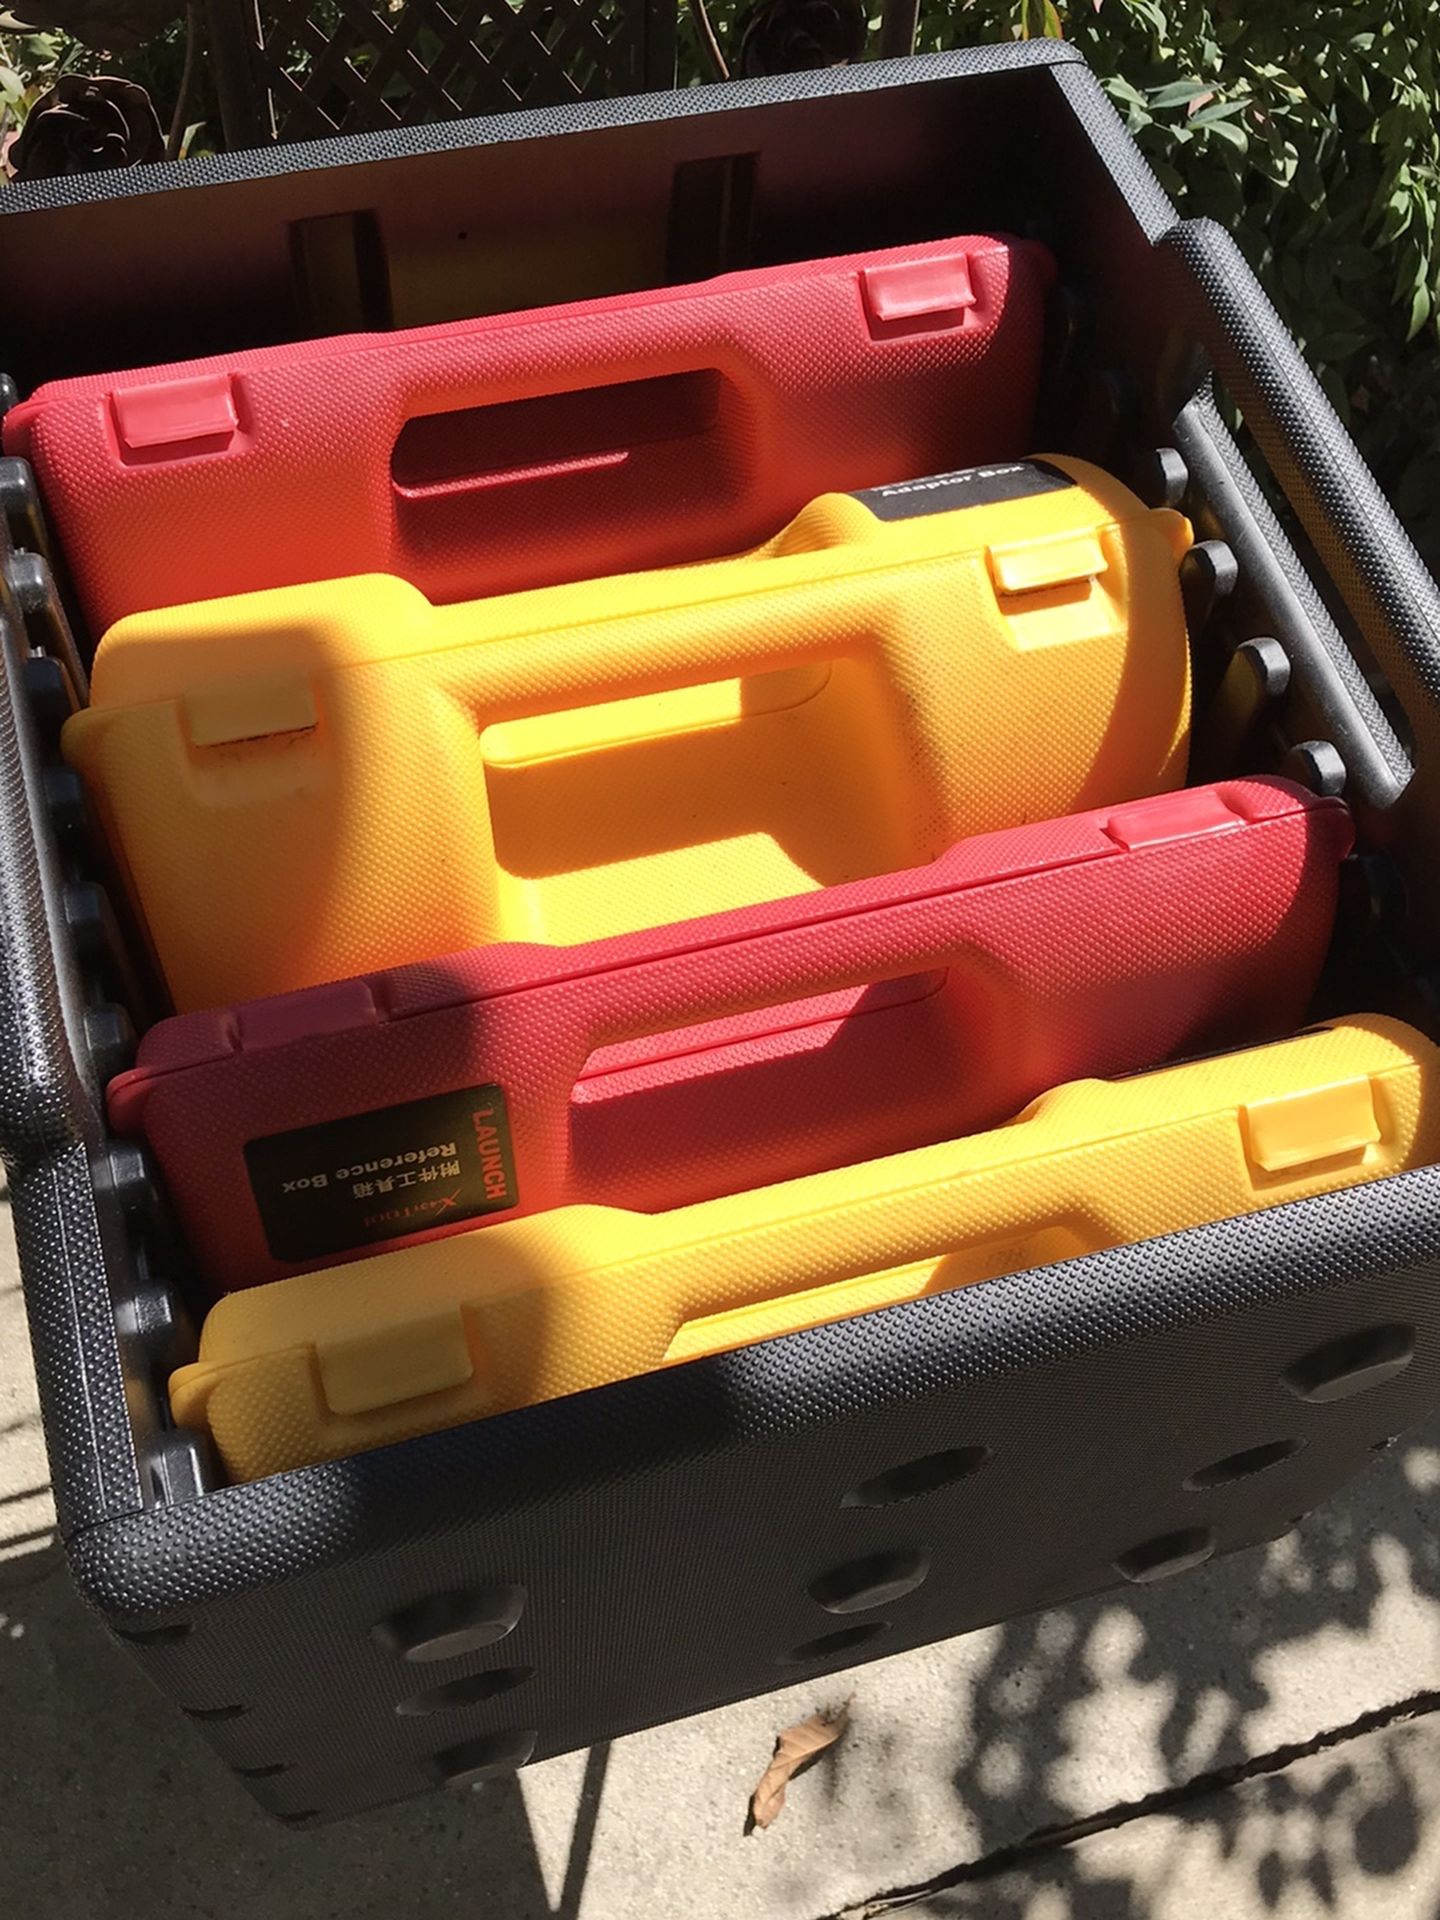 Hard shell plastic tool cases and crate￼